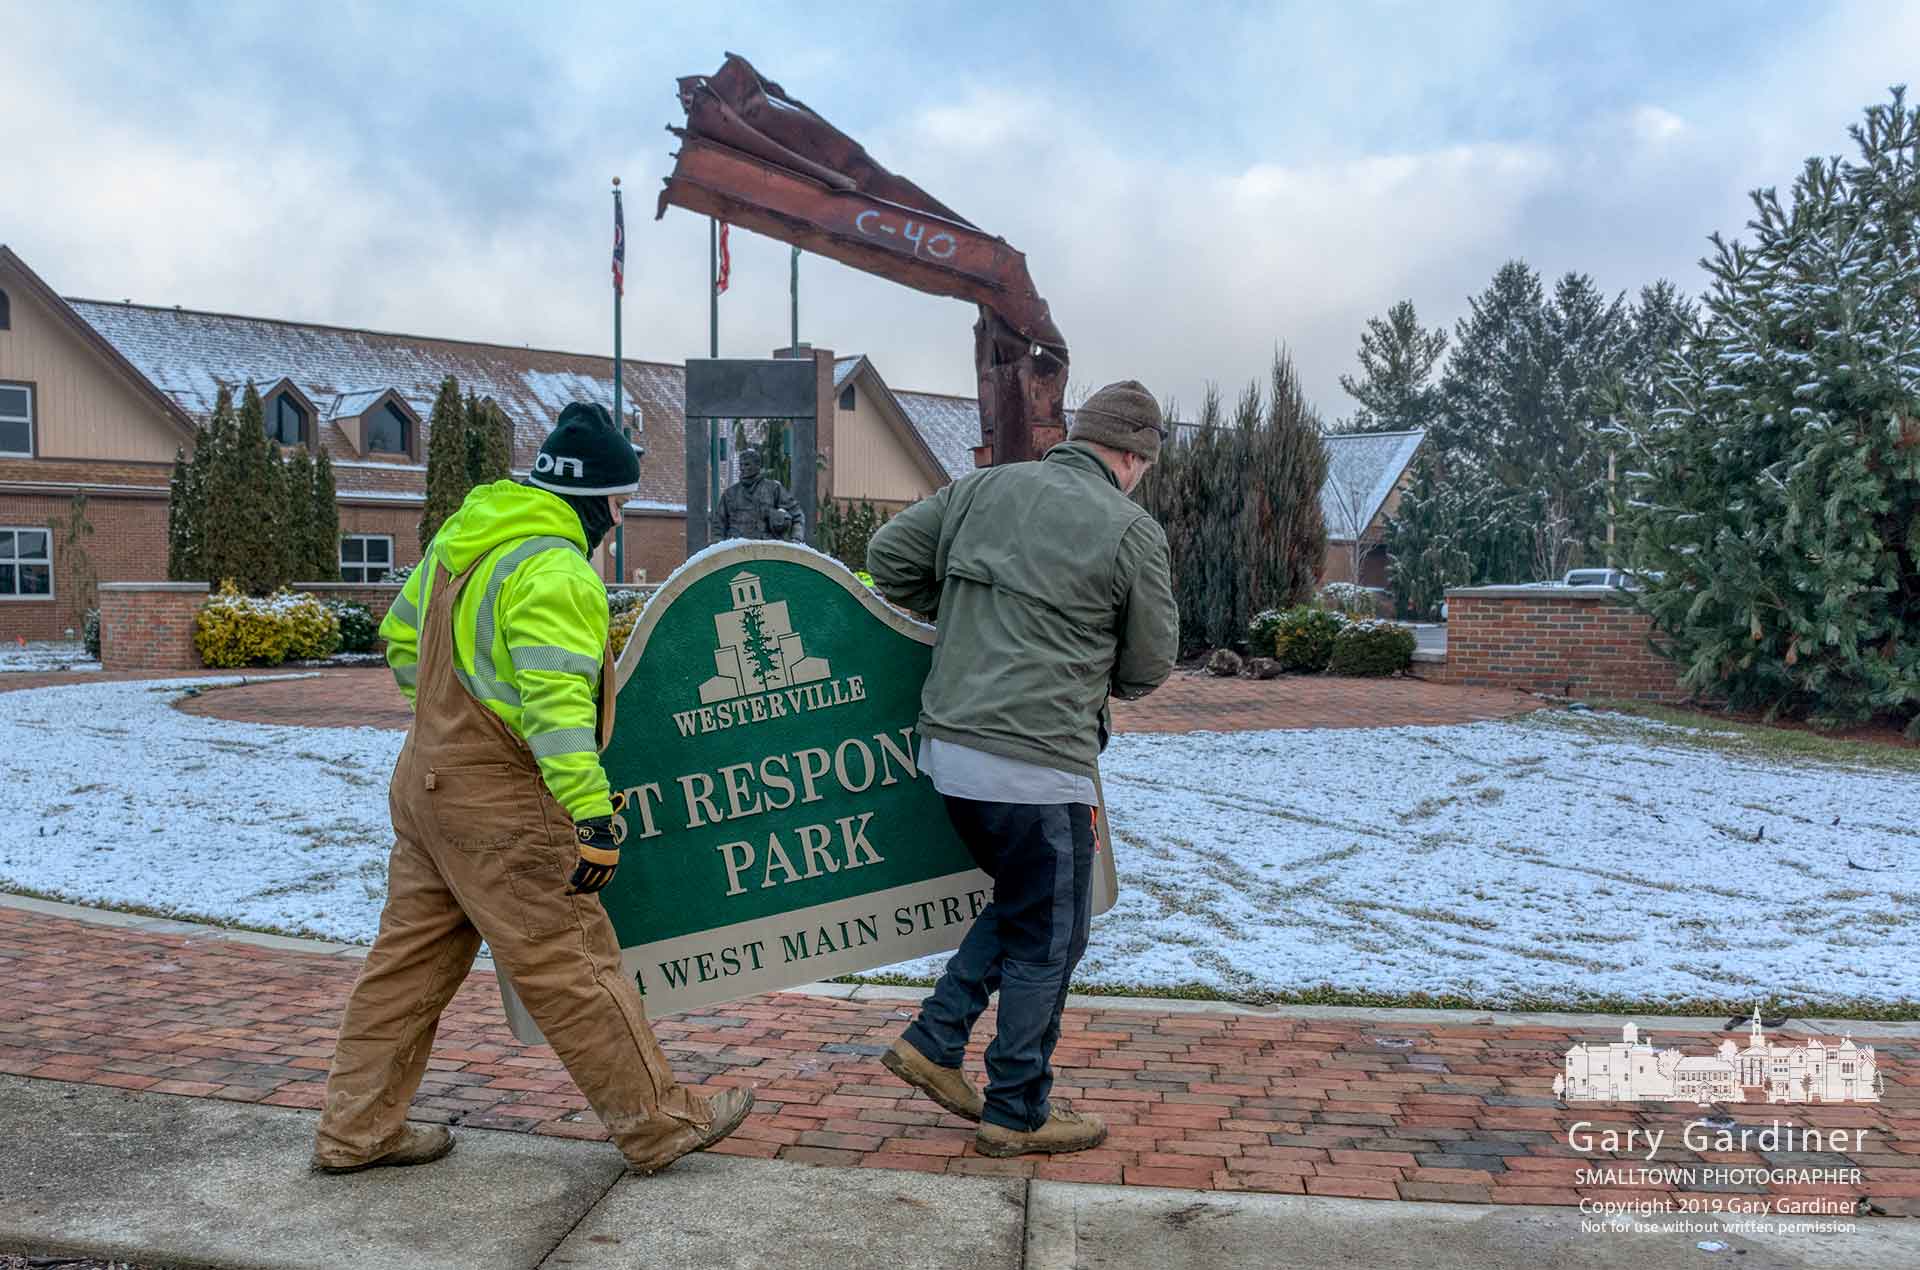 Westerville Parks workers remove the First Responders Park sign as contractors prepare to expand the original park to add a memorial for the two police officers killed in 2018. My Final Photo for March 19, 2019.